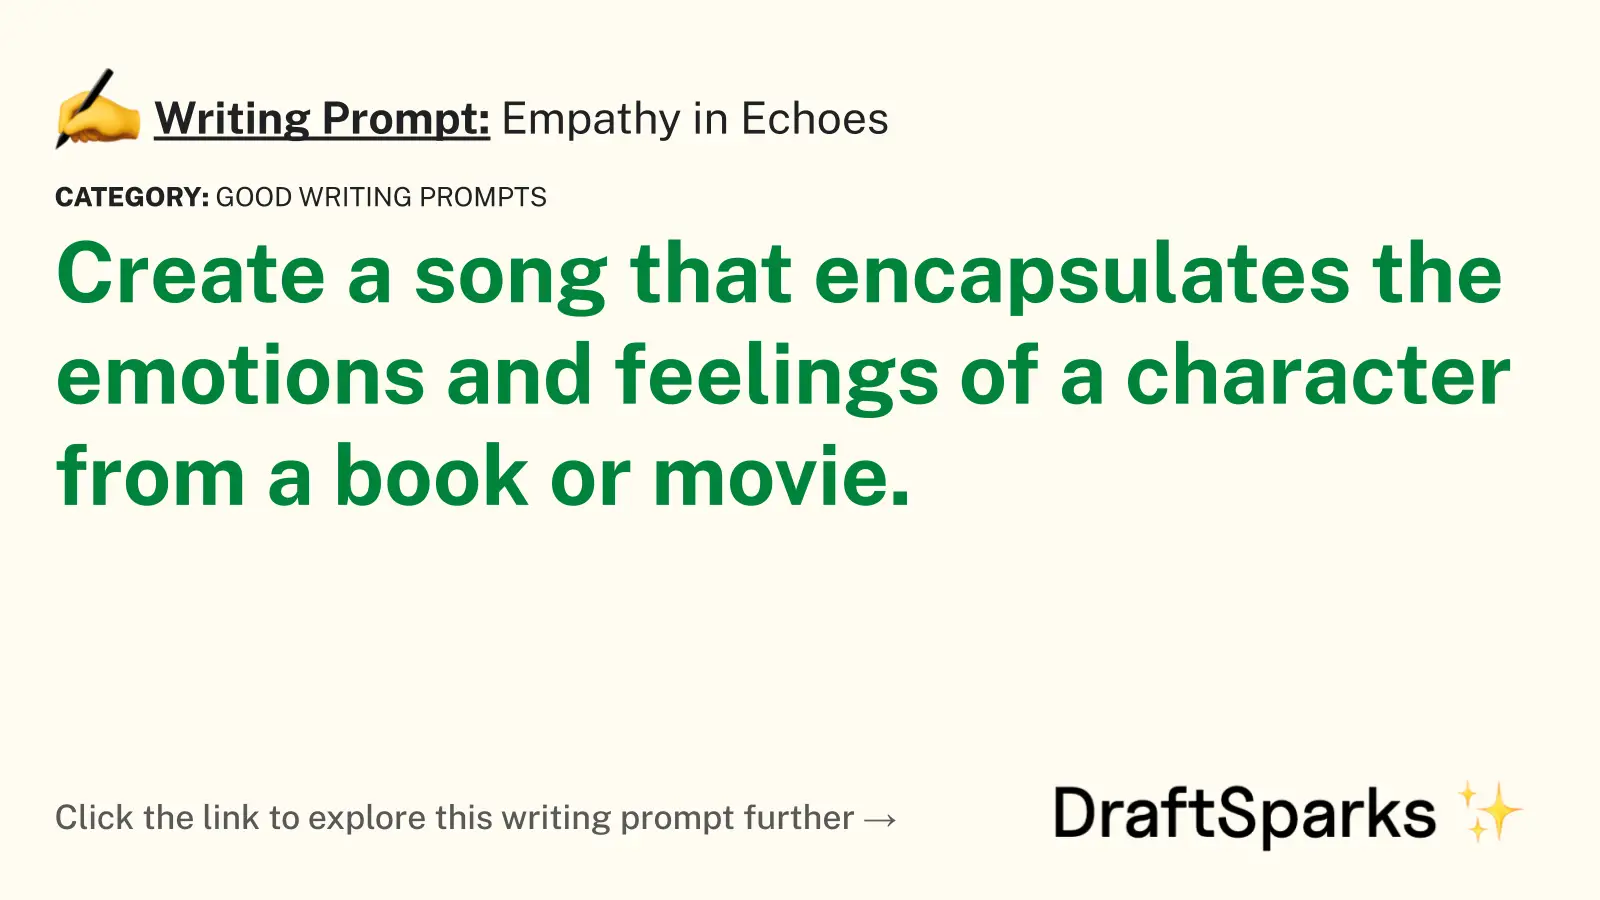 Empathy in Echoes